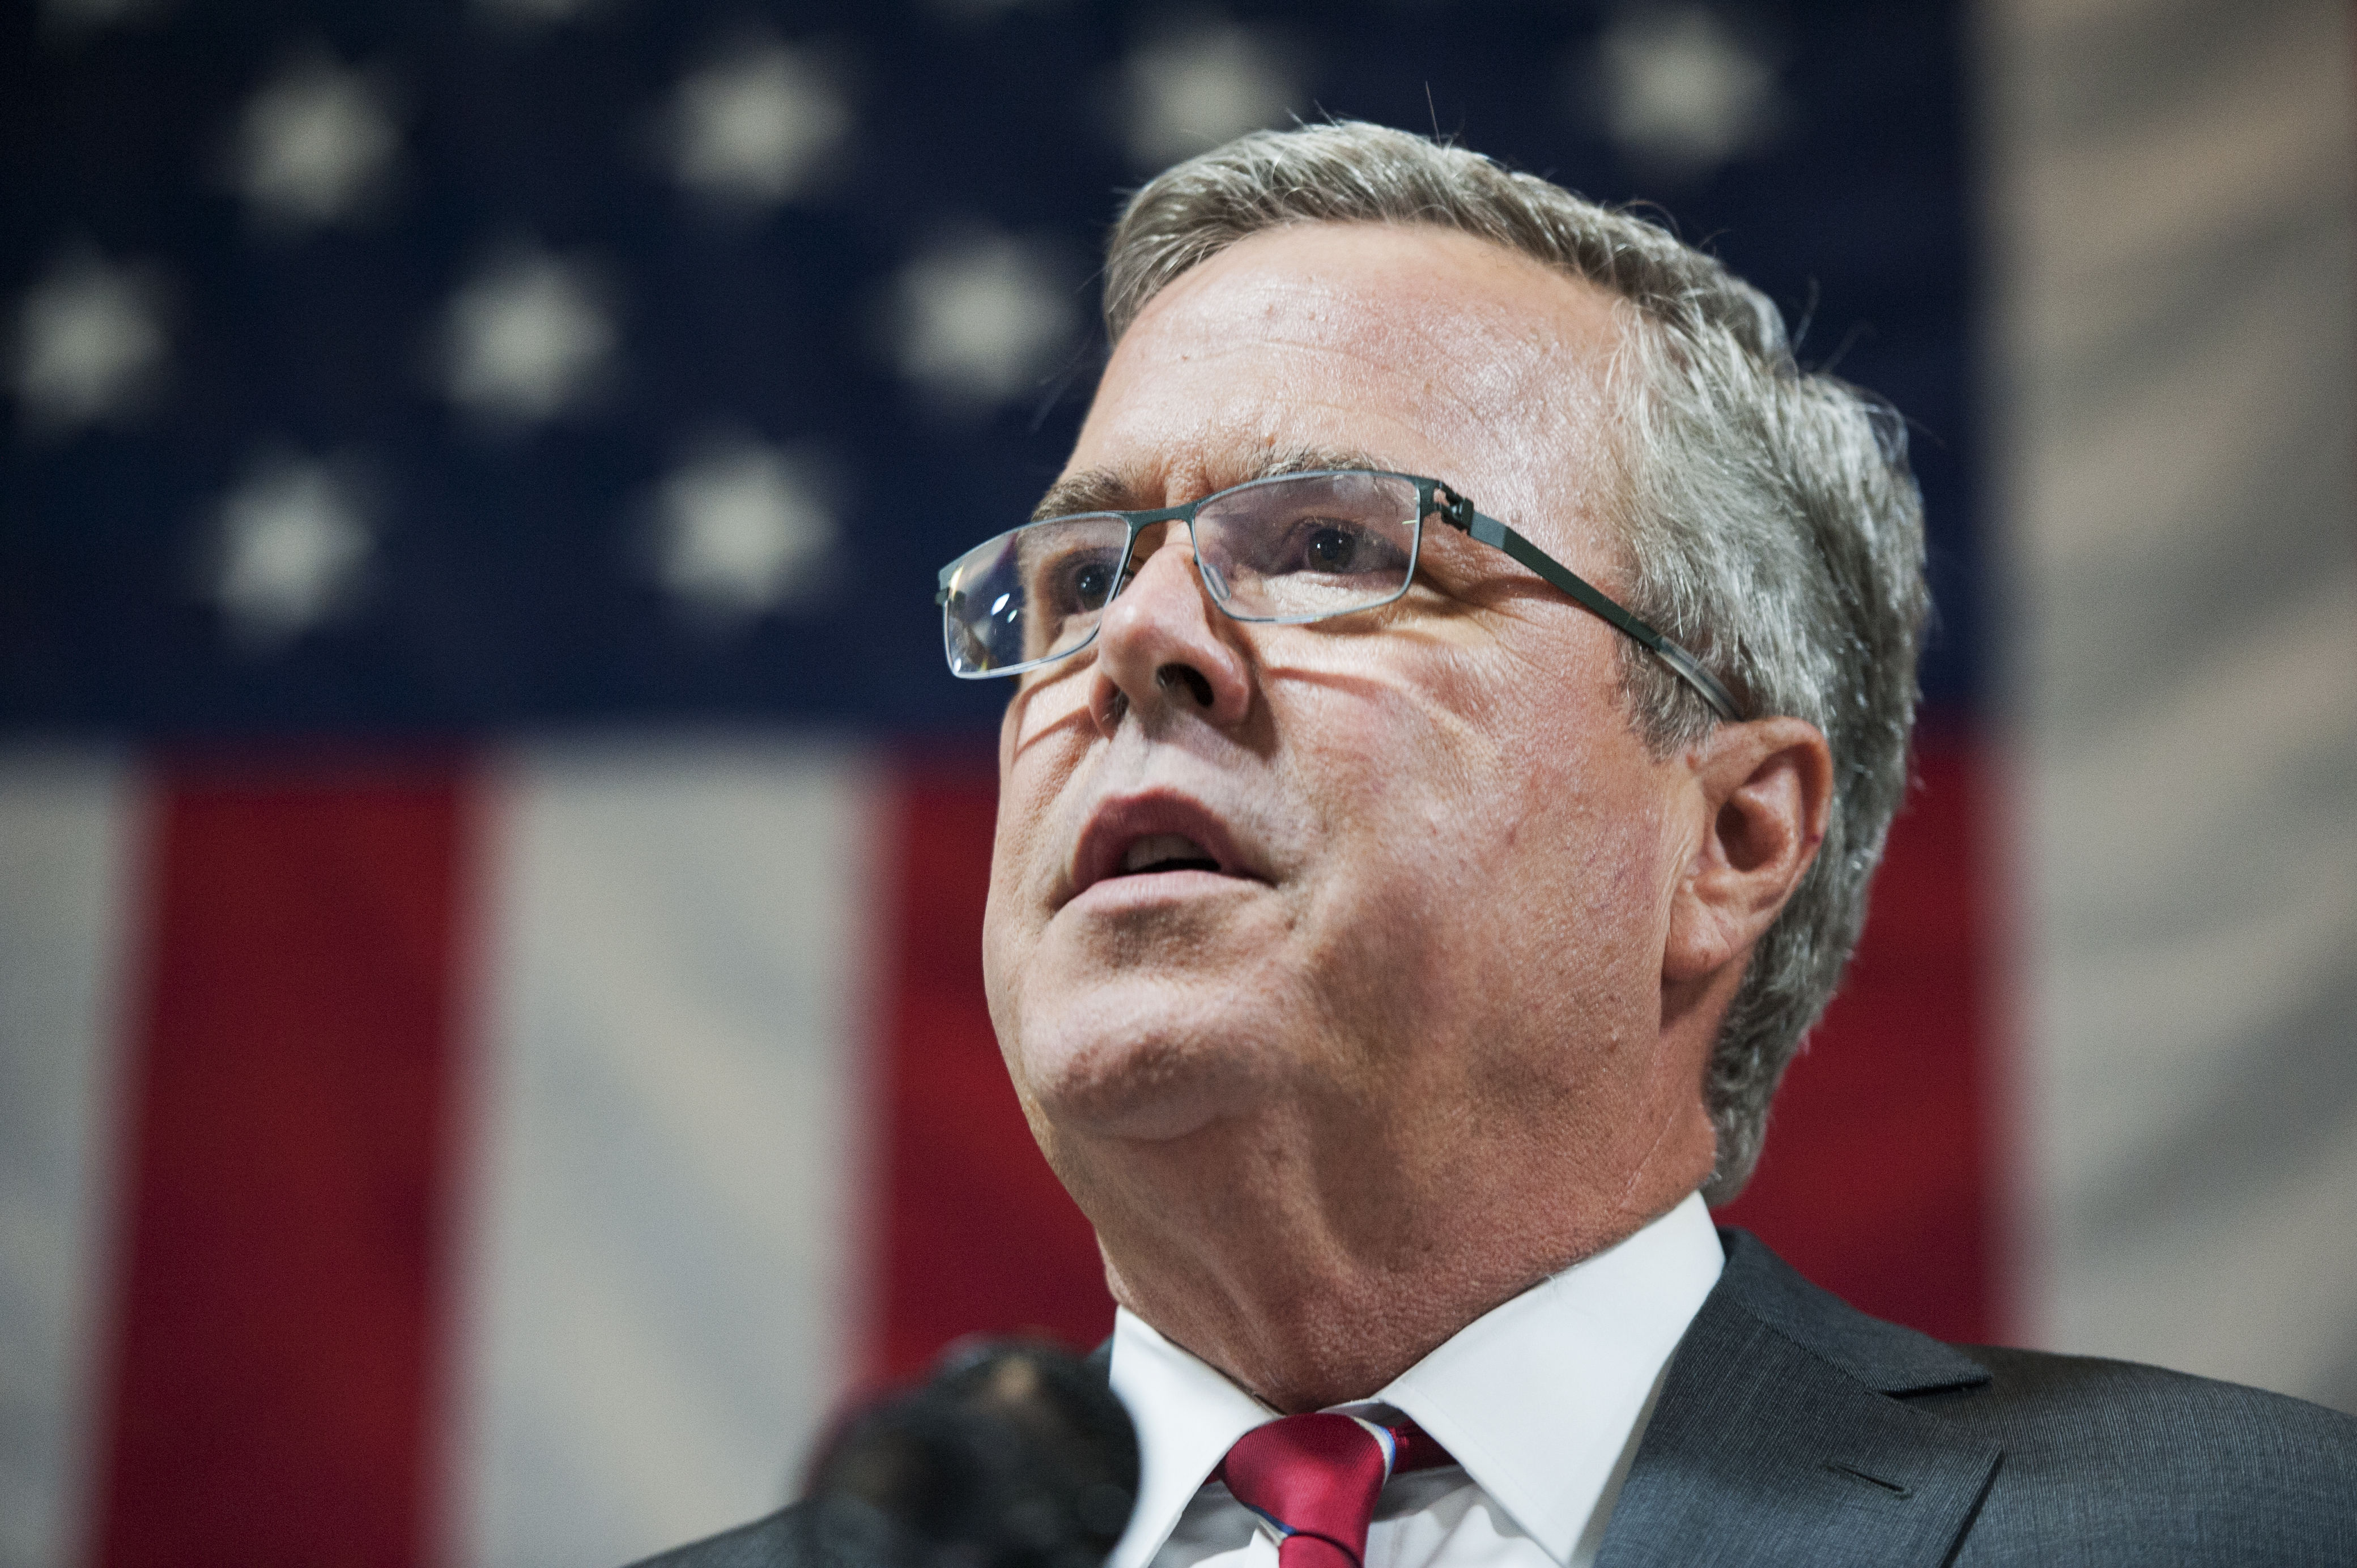 Former Florida Gov. Jeb Bush, speaks at an event at Illuminating Technologies Inc., in Greensboro, N.C. on Sept. 24, 2014. (Tom Williams—CQ-Roll Call)